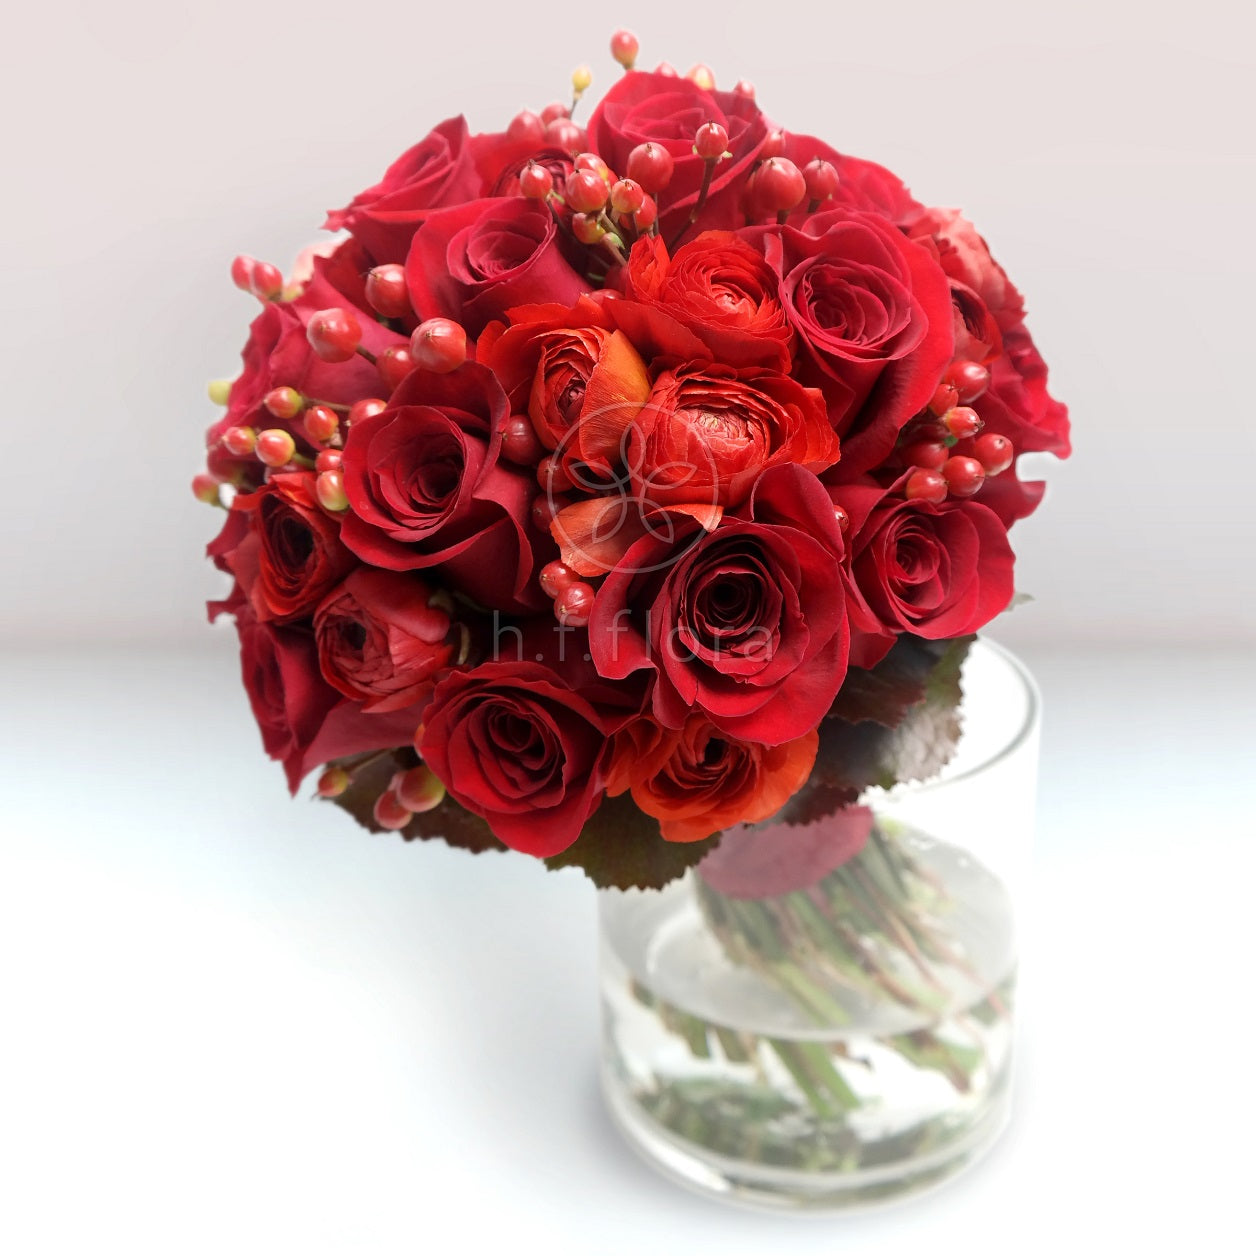 Red rose flower vase real view